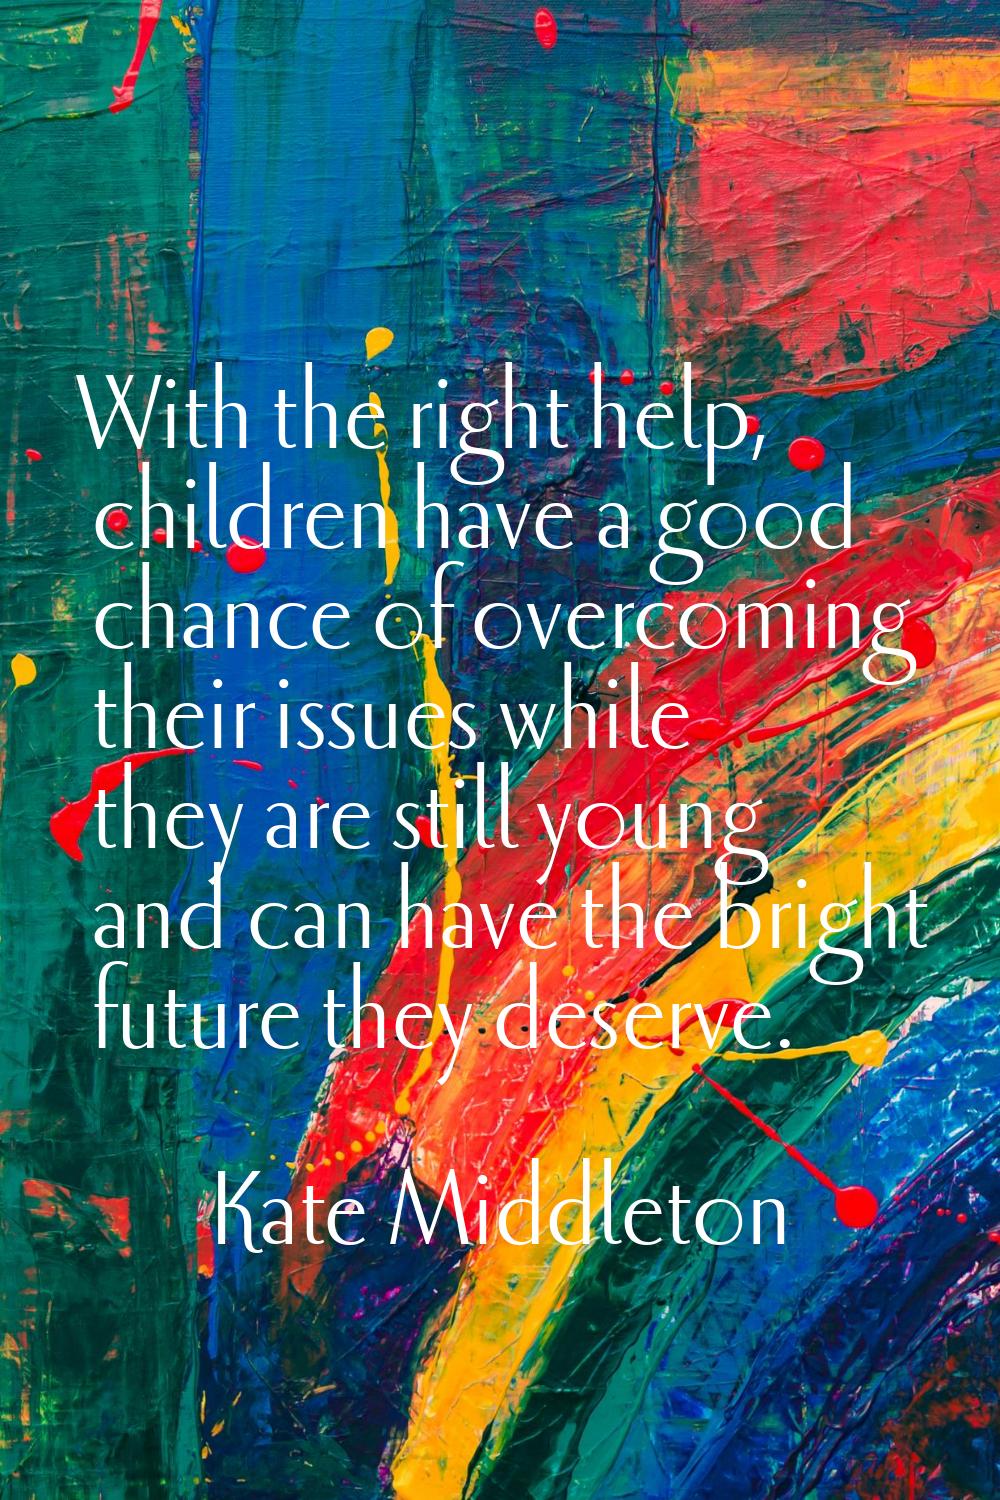 With the right help, children have a good chance of overcoming their issues while they are still yo